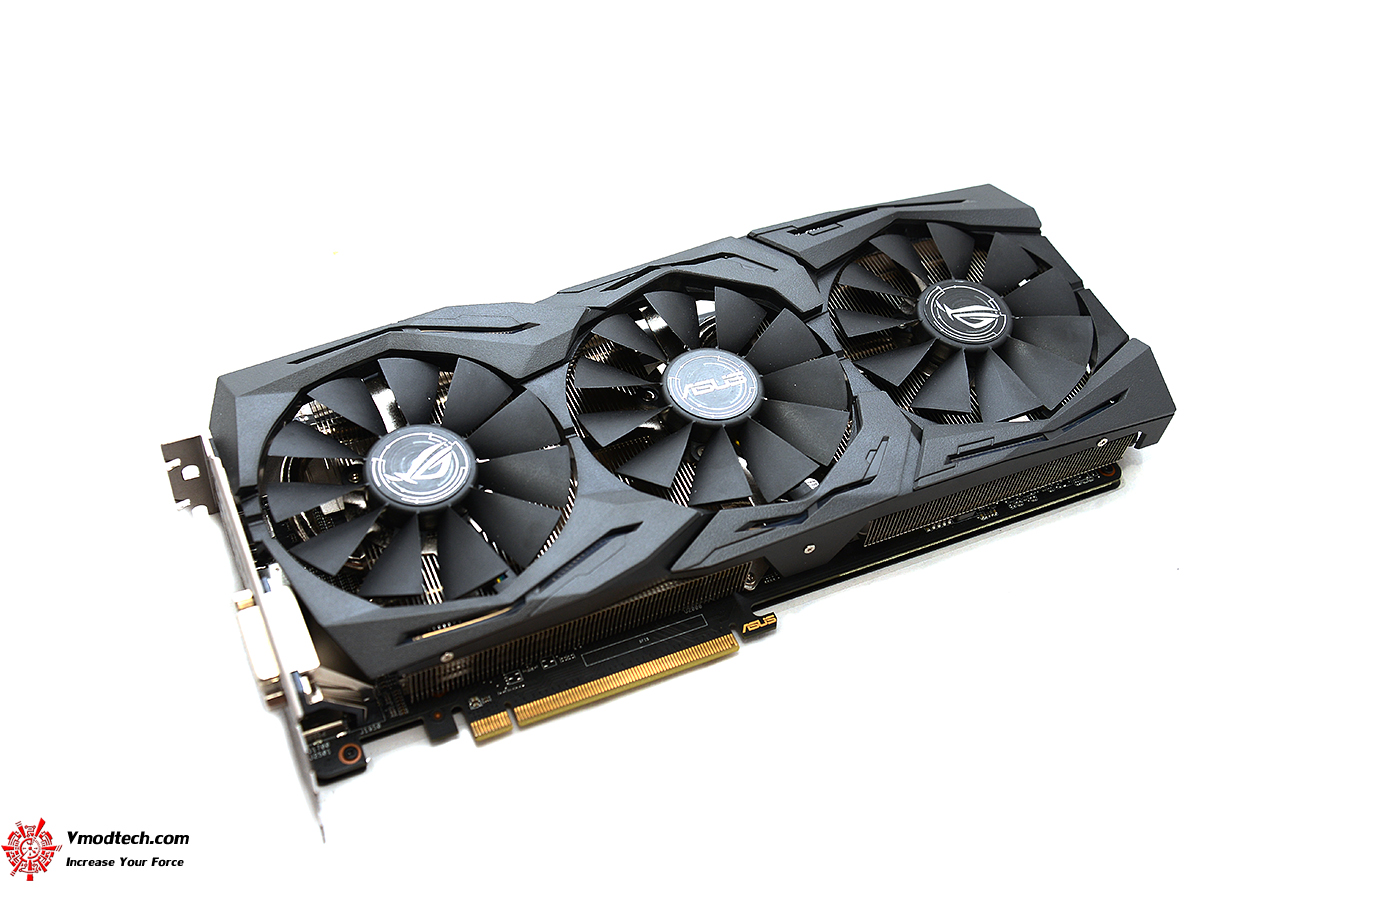 dsc 2397 ASUS ROG STRIX RX480 8G GAMING REVIEW